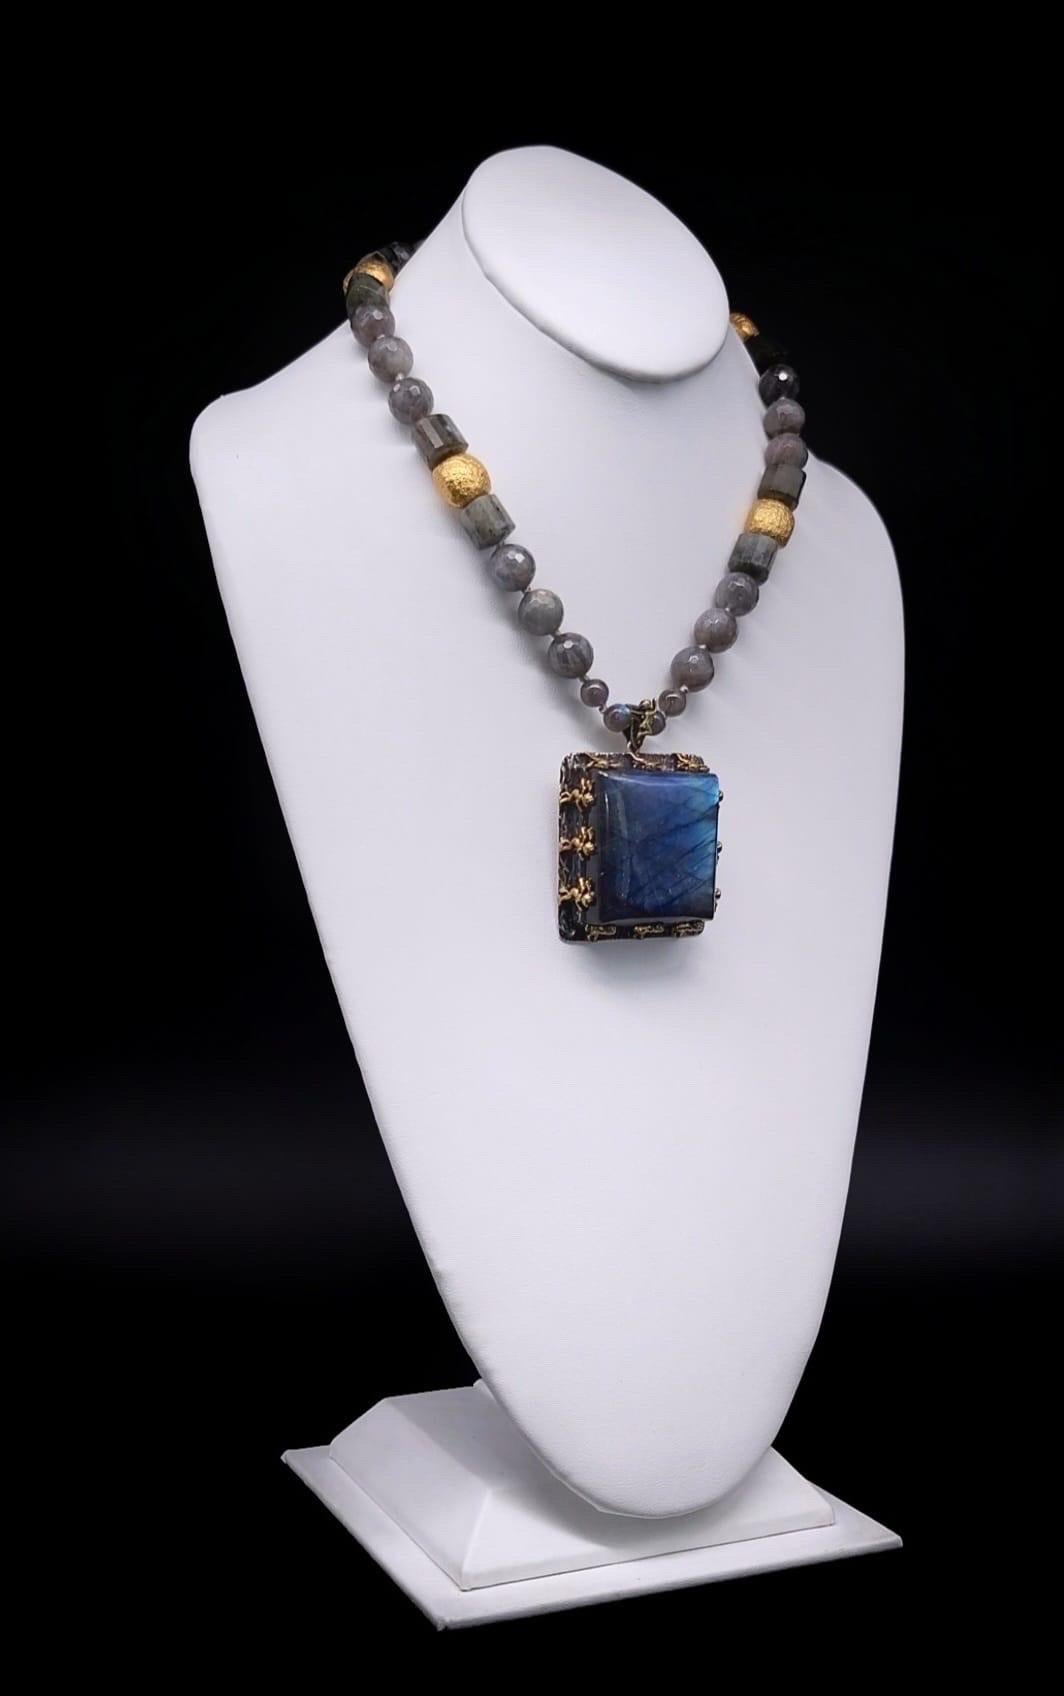 Bead A.Jeschel Brillant Labradorite necklace with a stunning pendant. For Sale